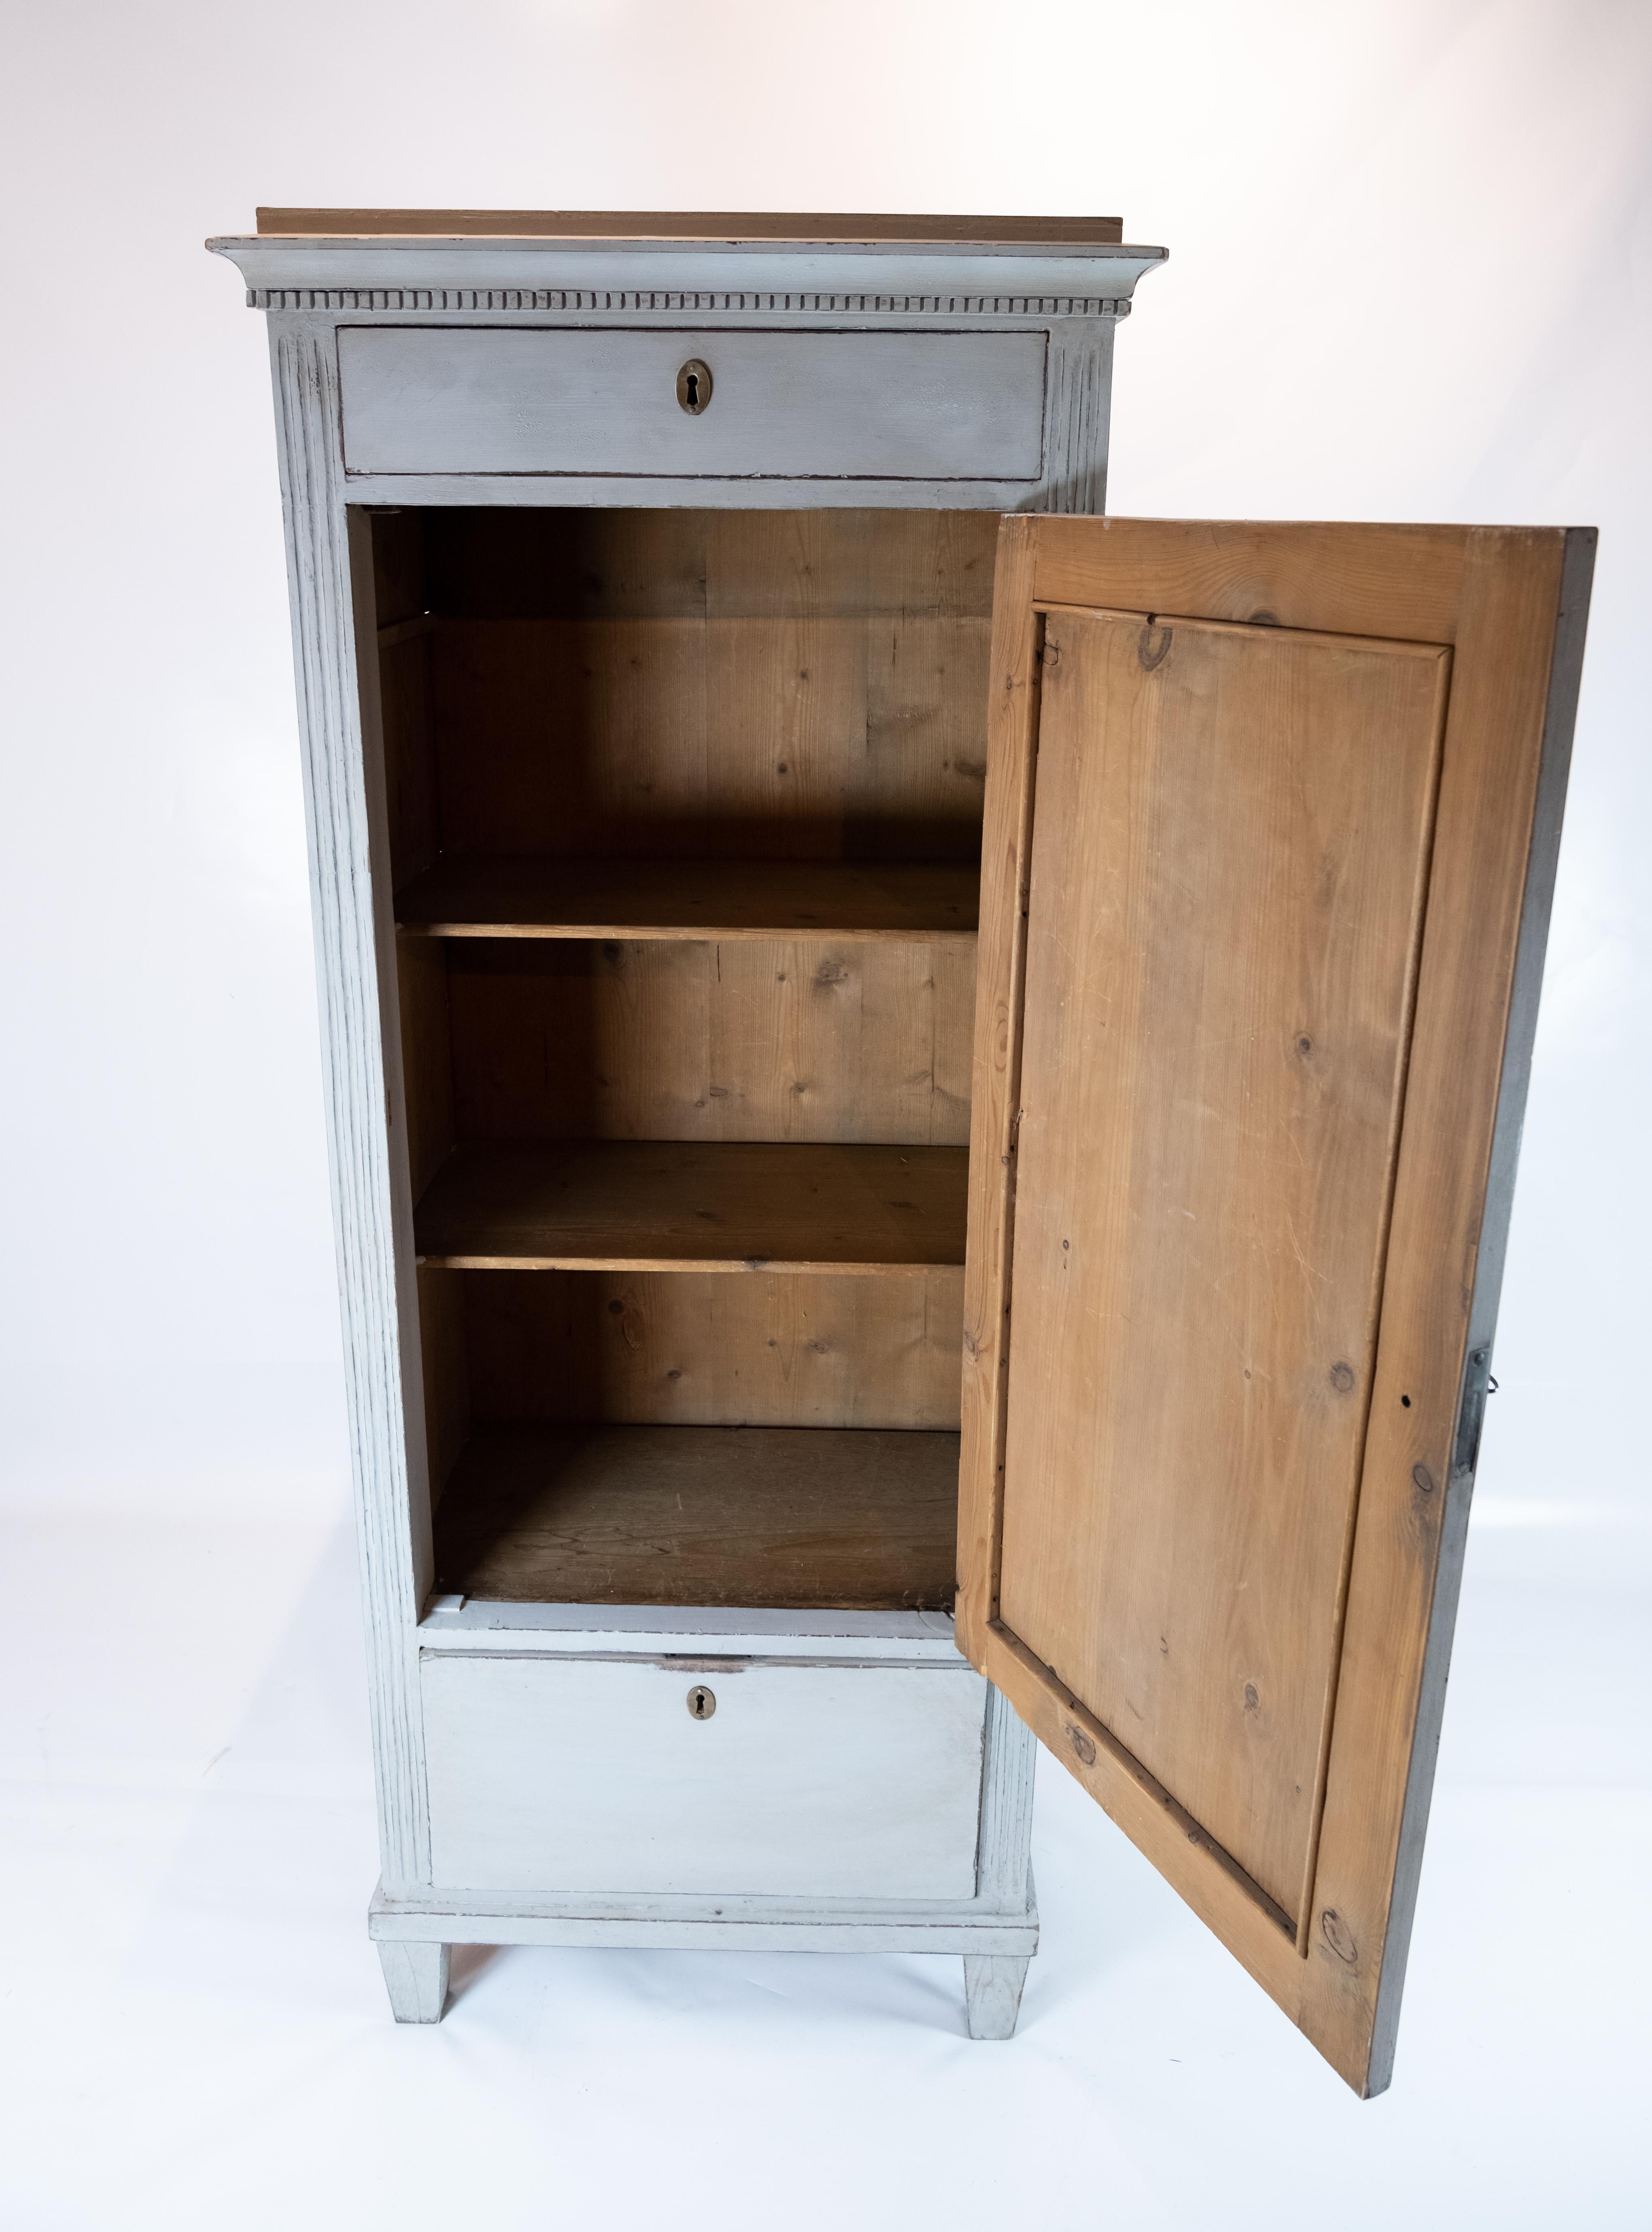 Mid-19th Century Grey Painted Gustavian Tall Cabinet, in Great Condition from the 1840s